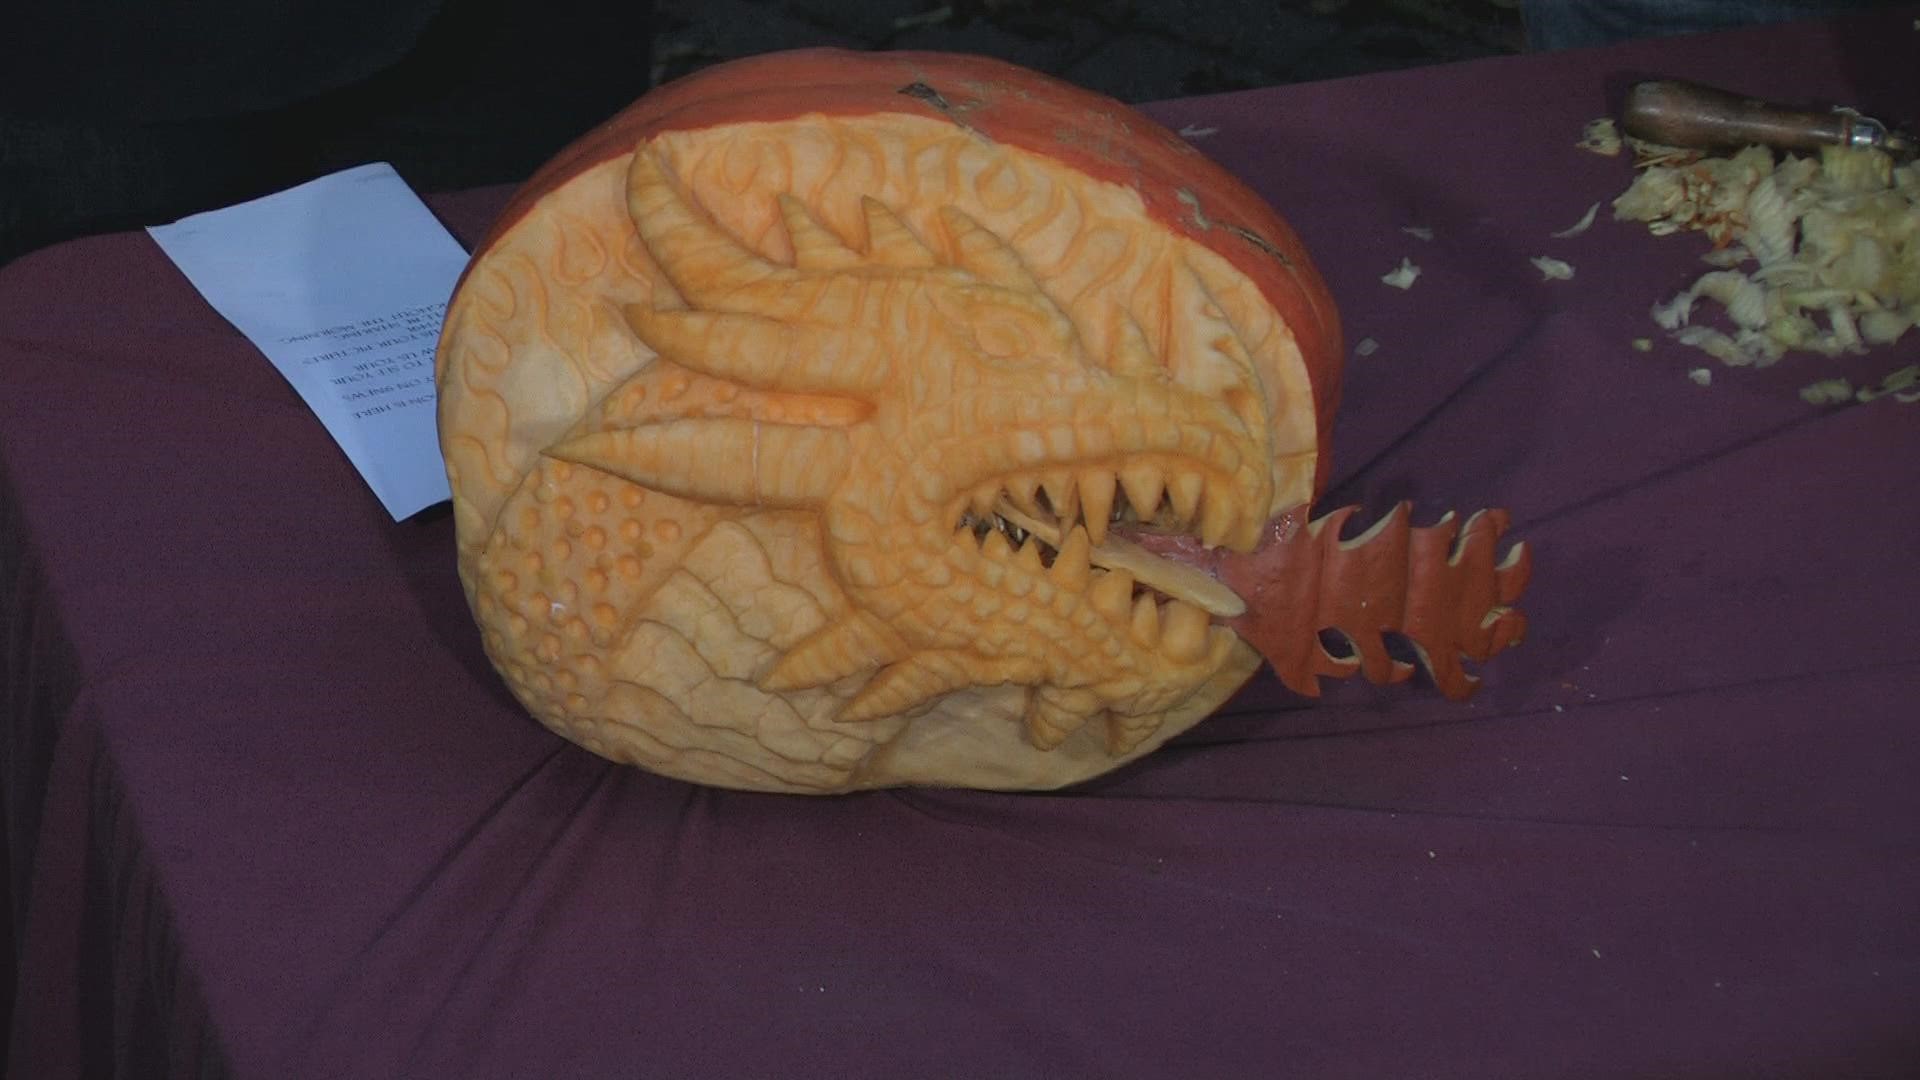 Erin and Willy from the Denver Botanic Gardens stop by 9NEWS to share some pumpkin carving tips and tricks ahead of Halloween.